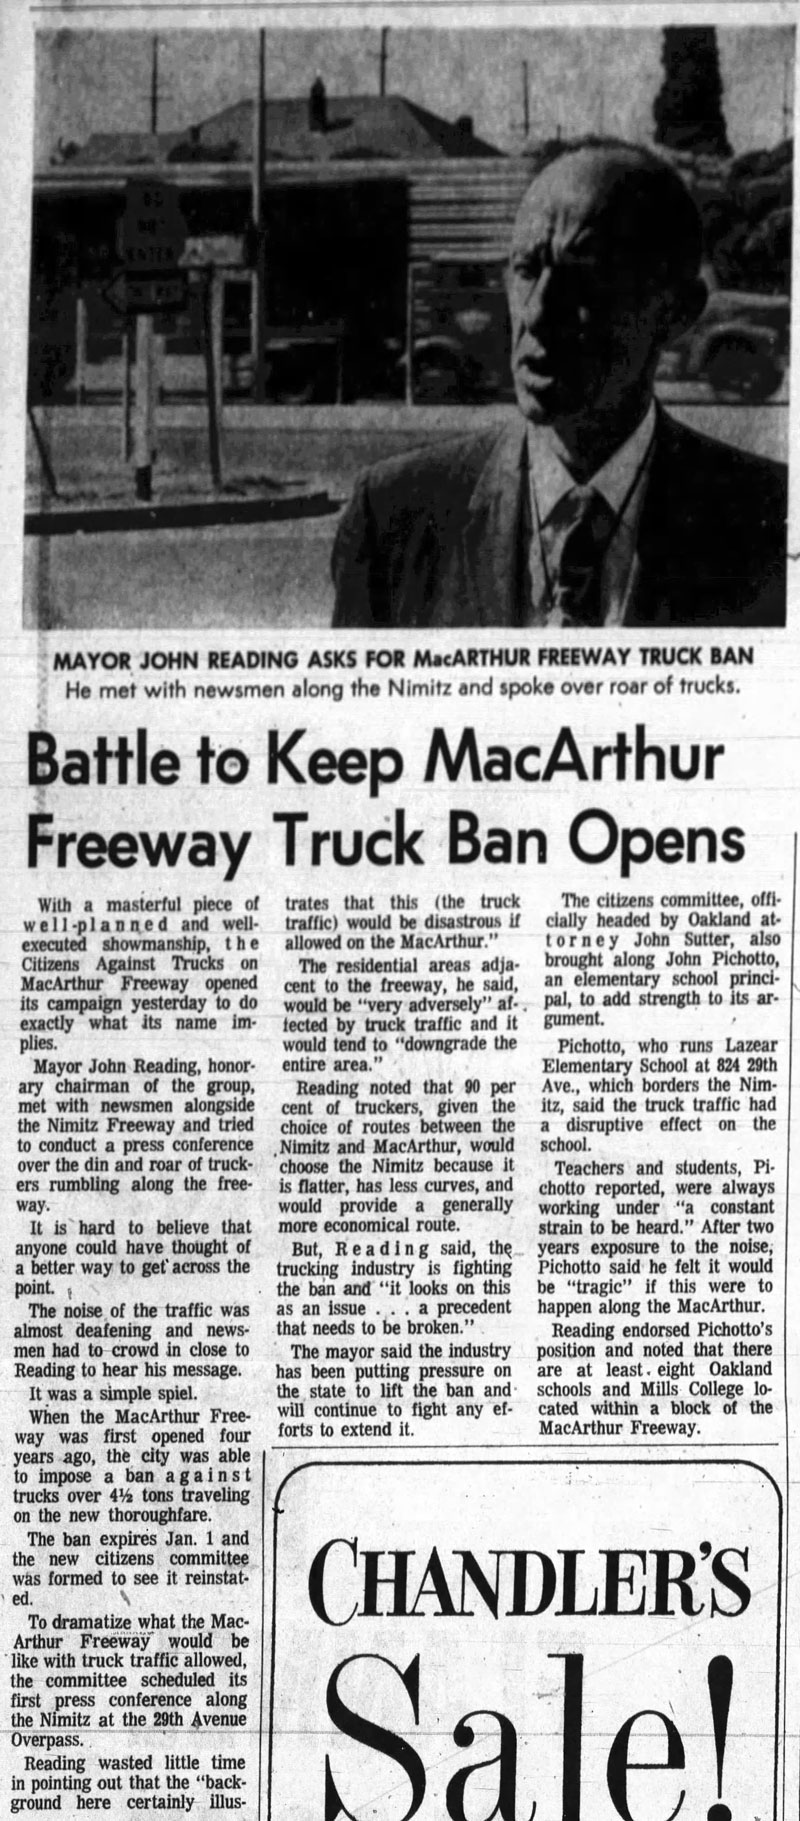 Oakland tribune article from July 4, 1967